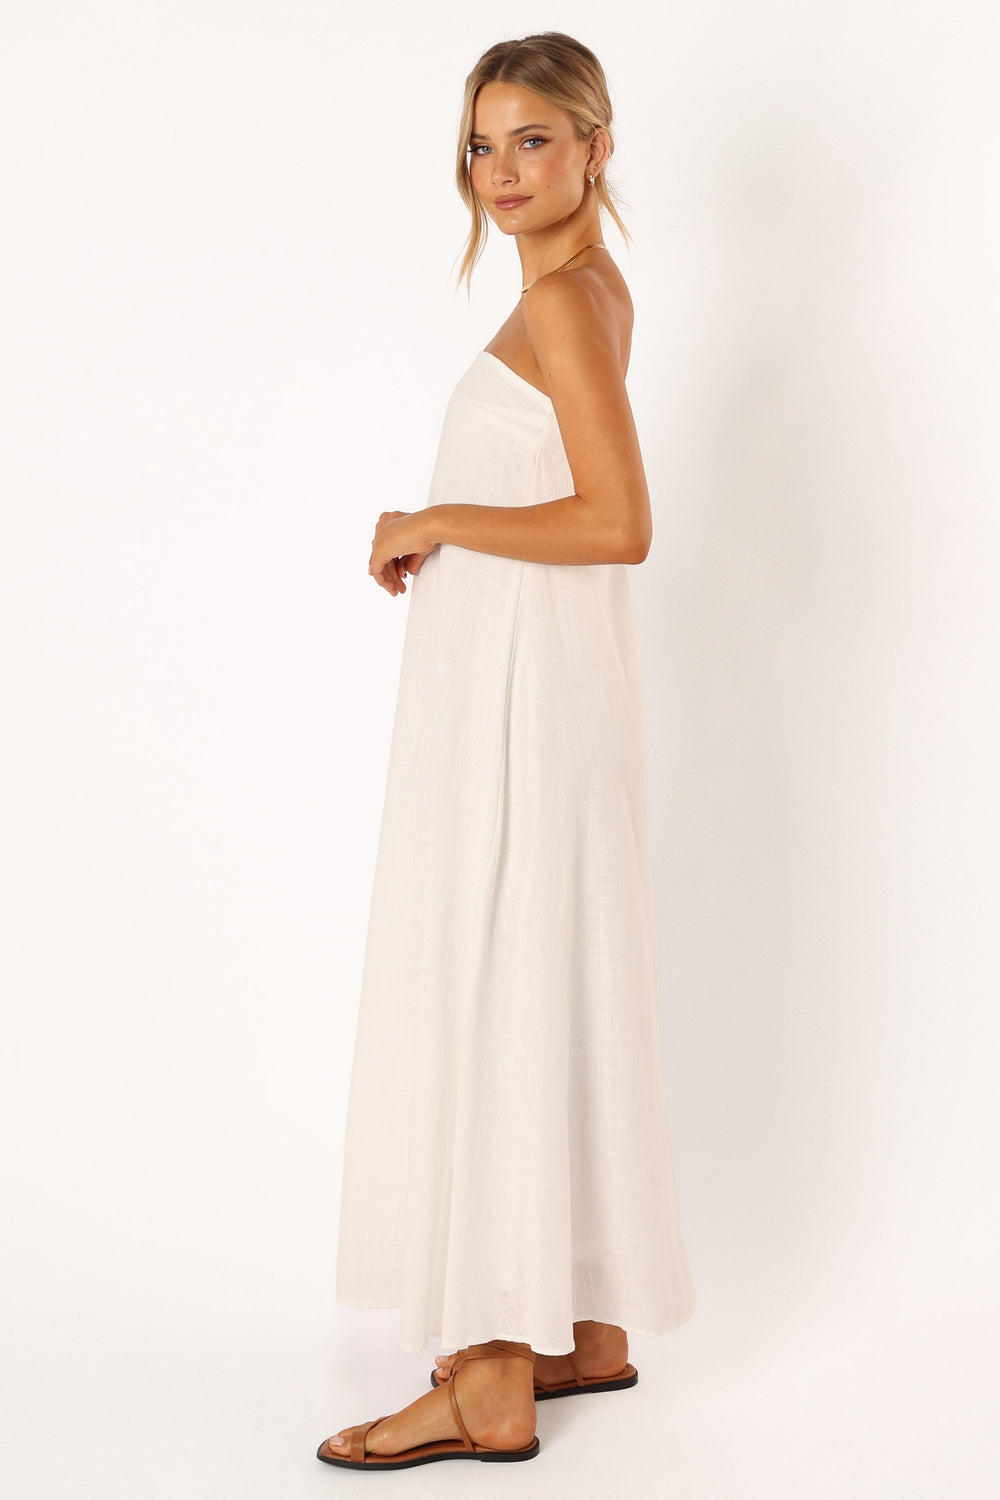 Petal and Pup USA DRESSES Soph Strapless Maxi Dress - White